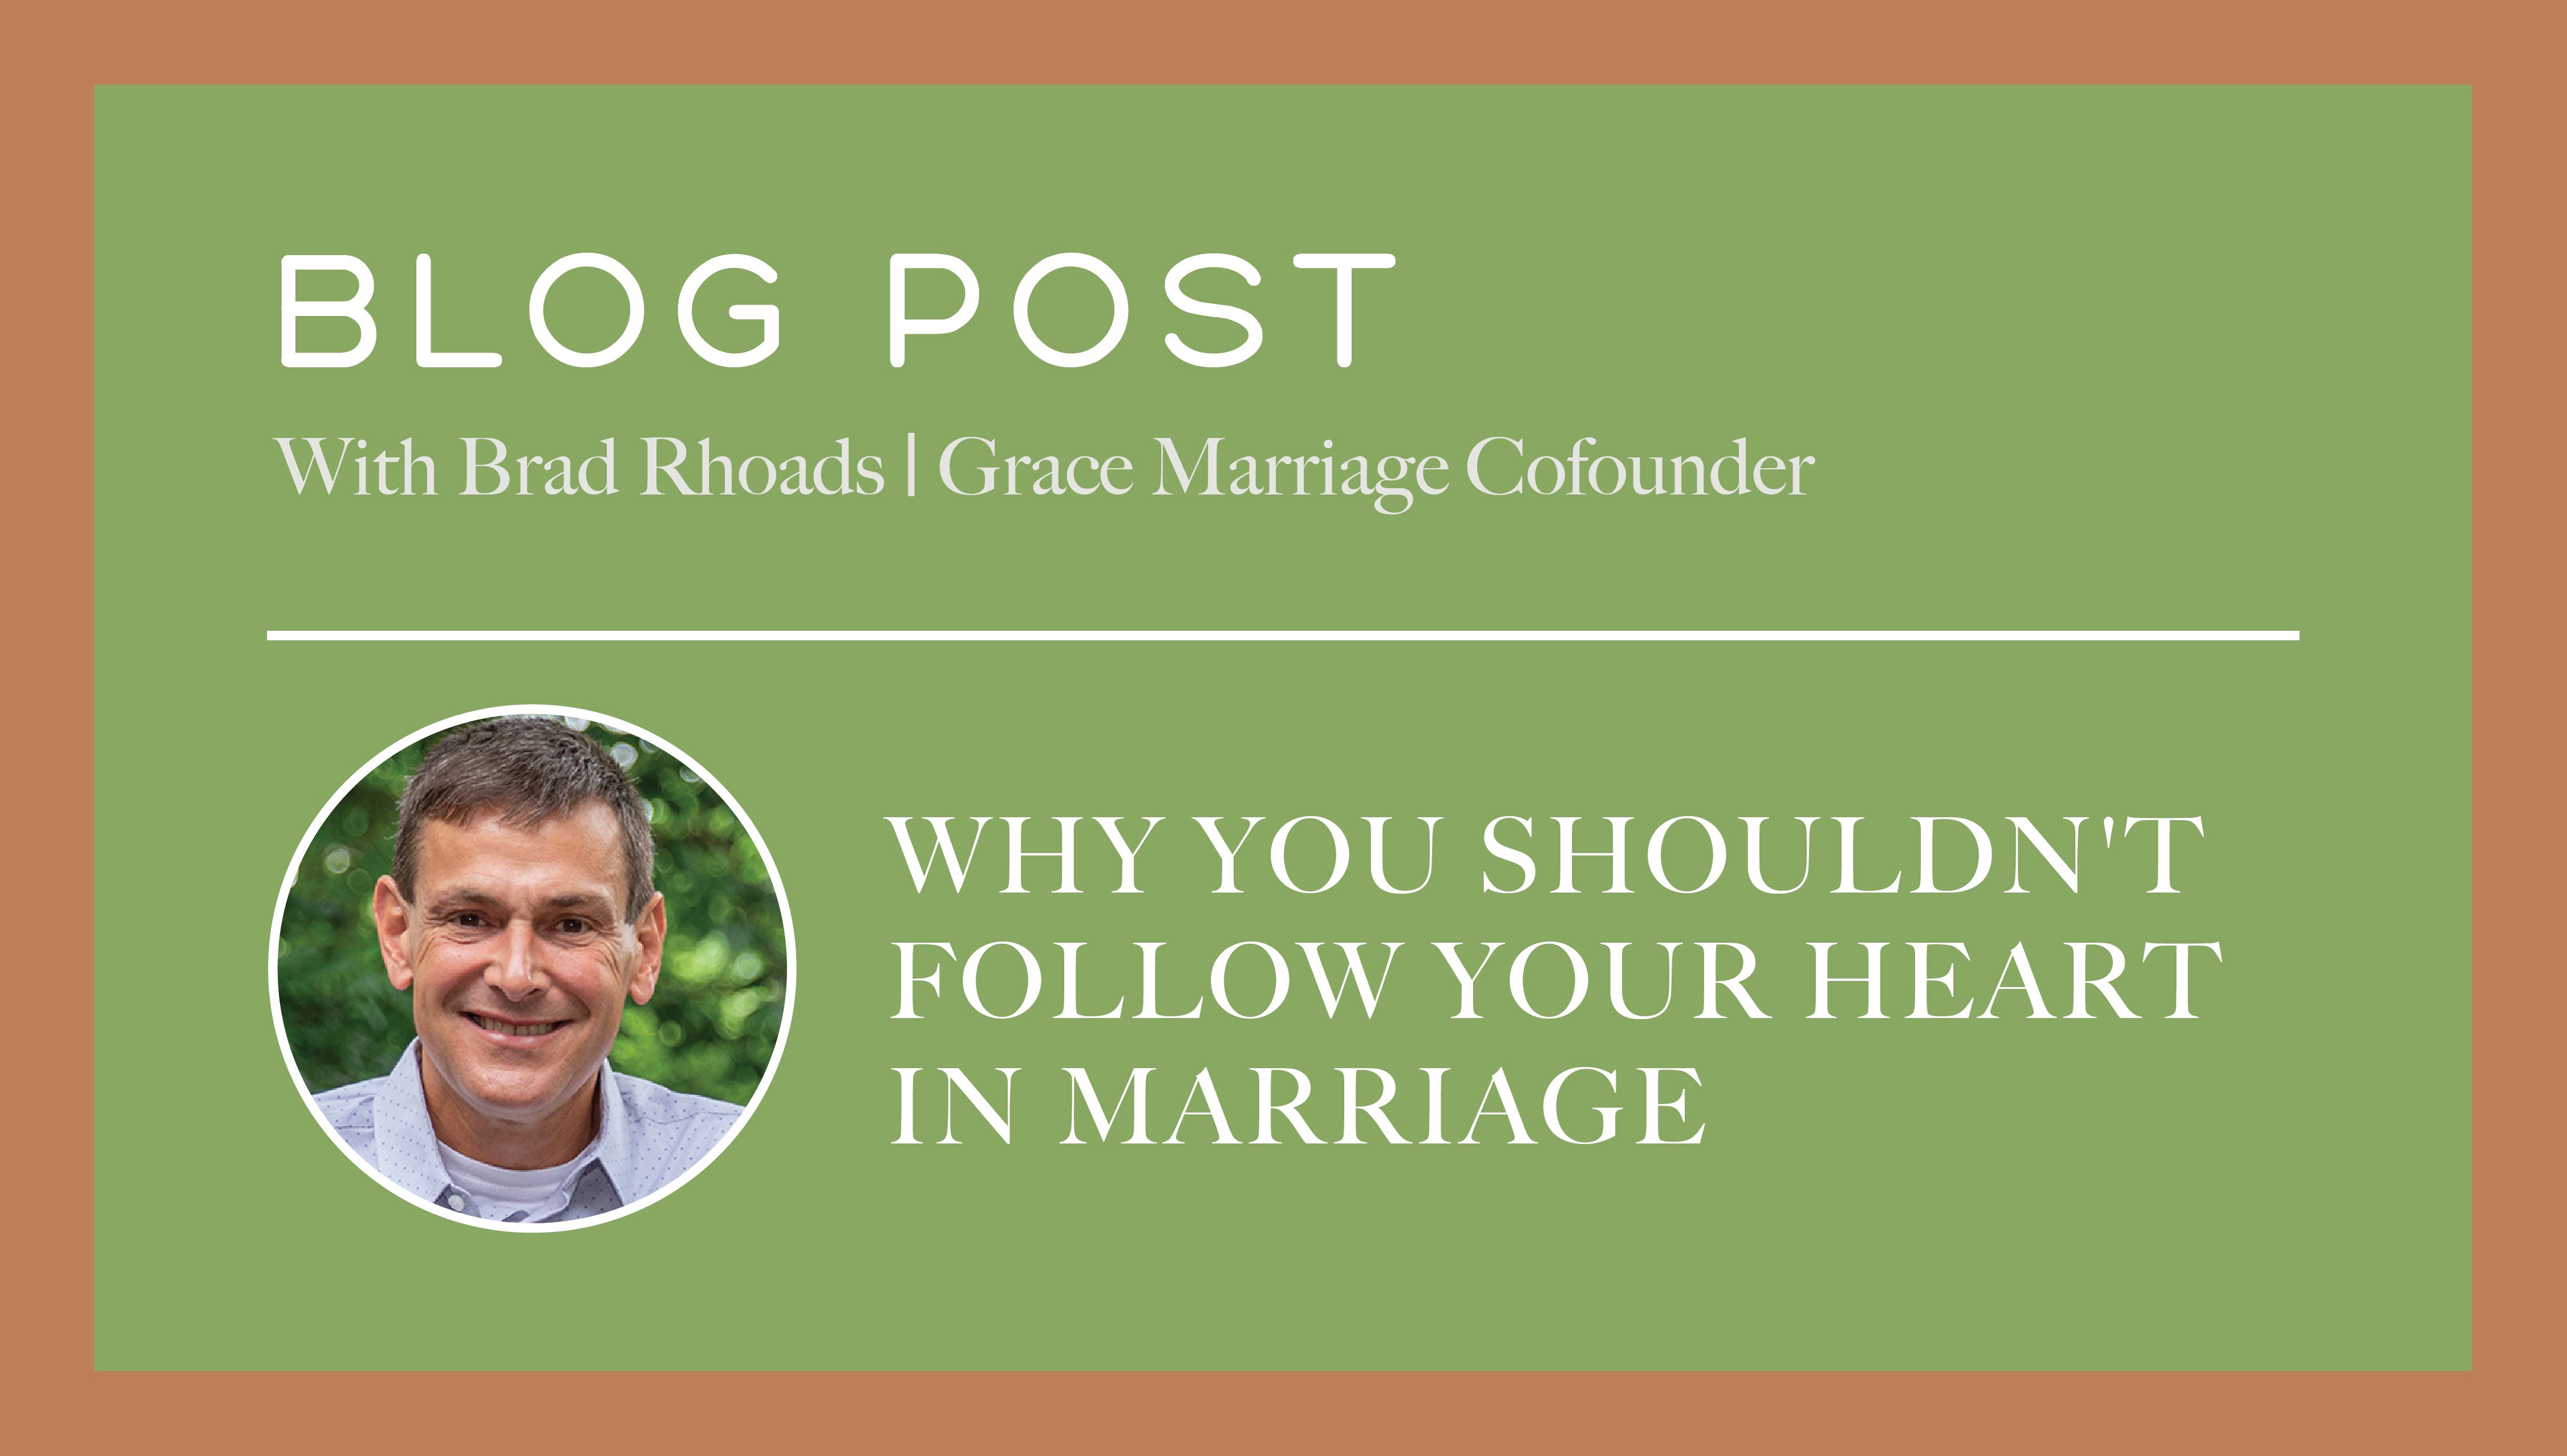 Why You Shouldn't Follow Your Heart in Marriage